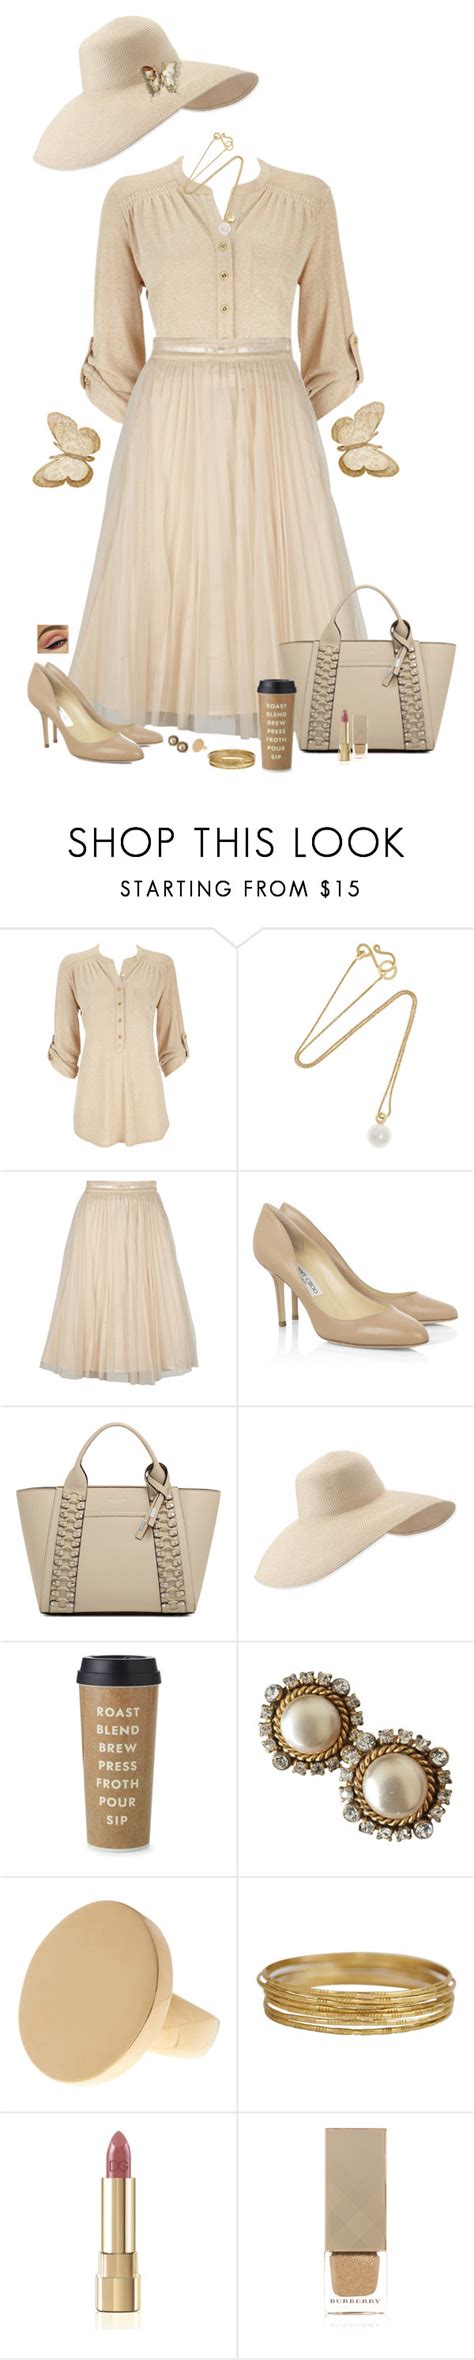 Nude Wish By Lghockey Liked On Polyvore Featuring Wallis Sophie